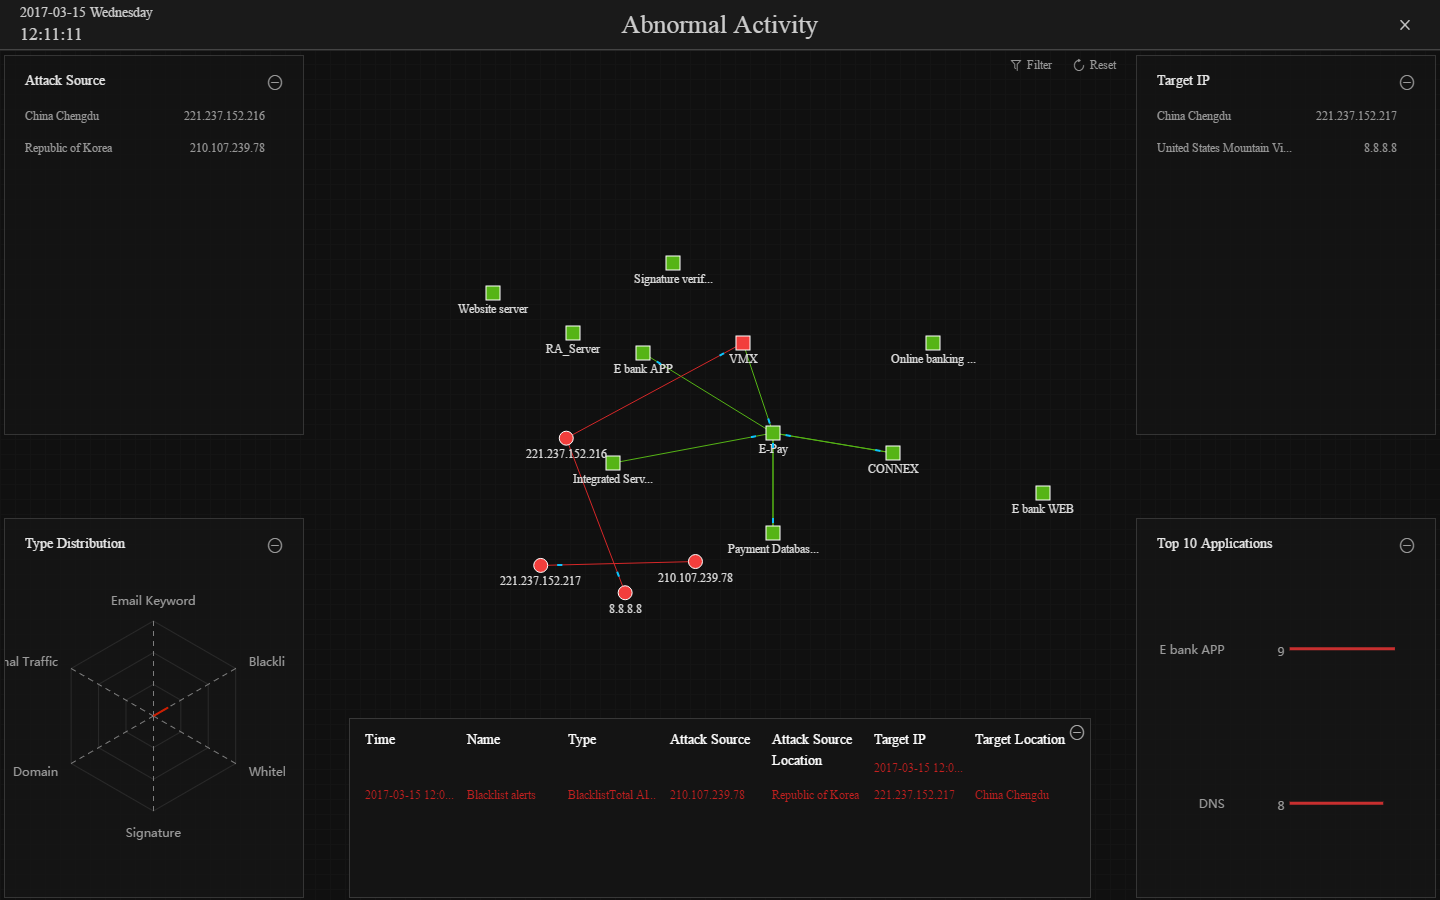 Real-time anomaly monitoring